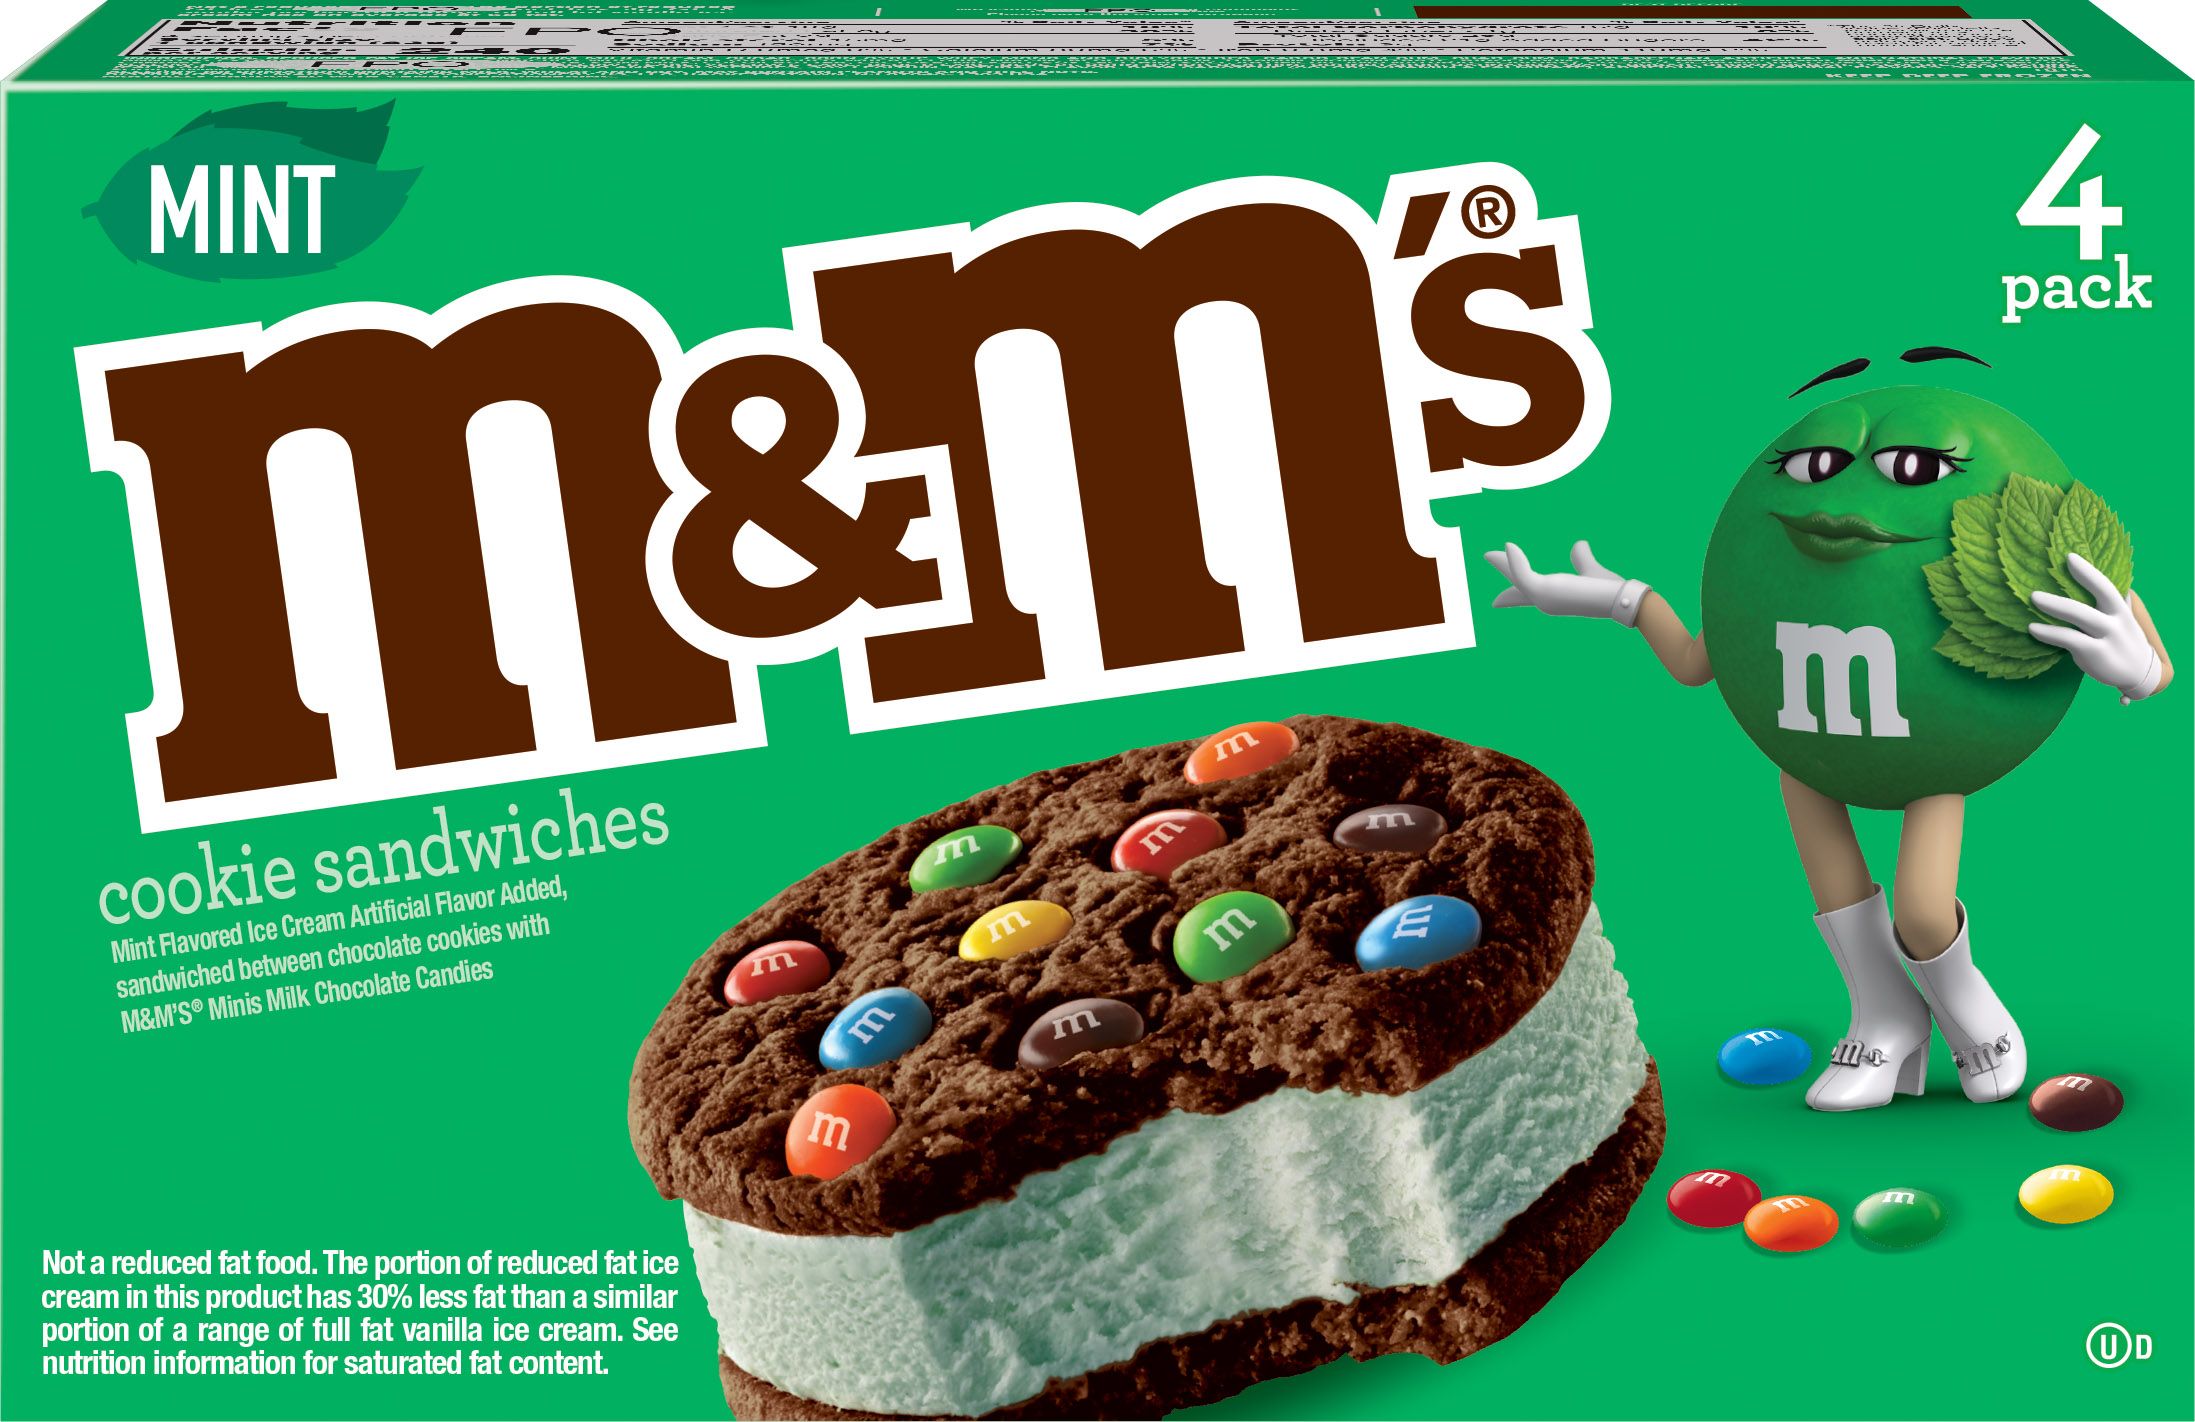 PHOTO: New chocolate M&M's cookie sandwiches with mint ice cream.